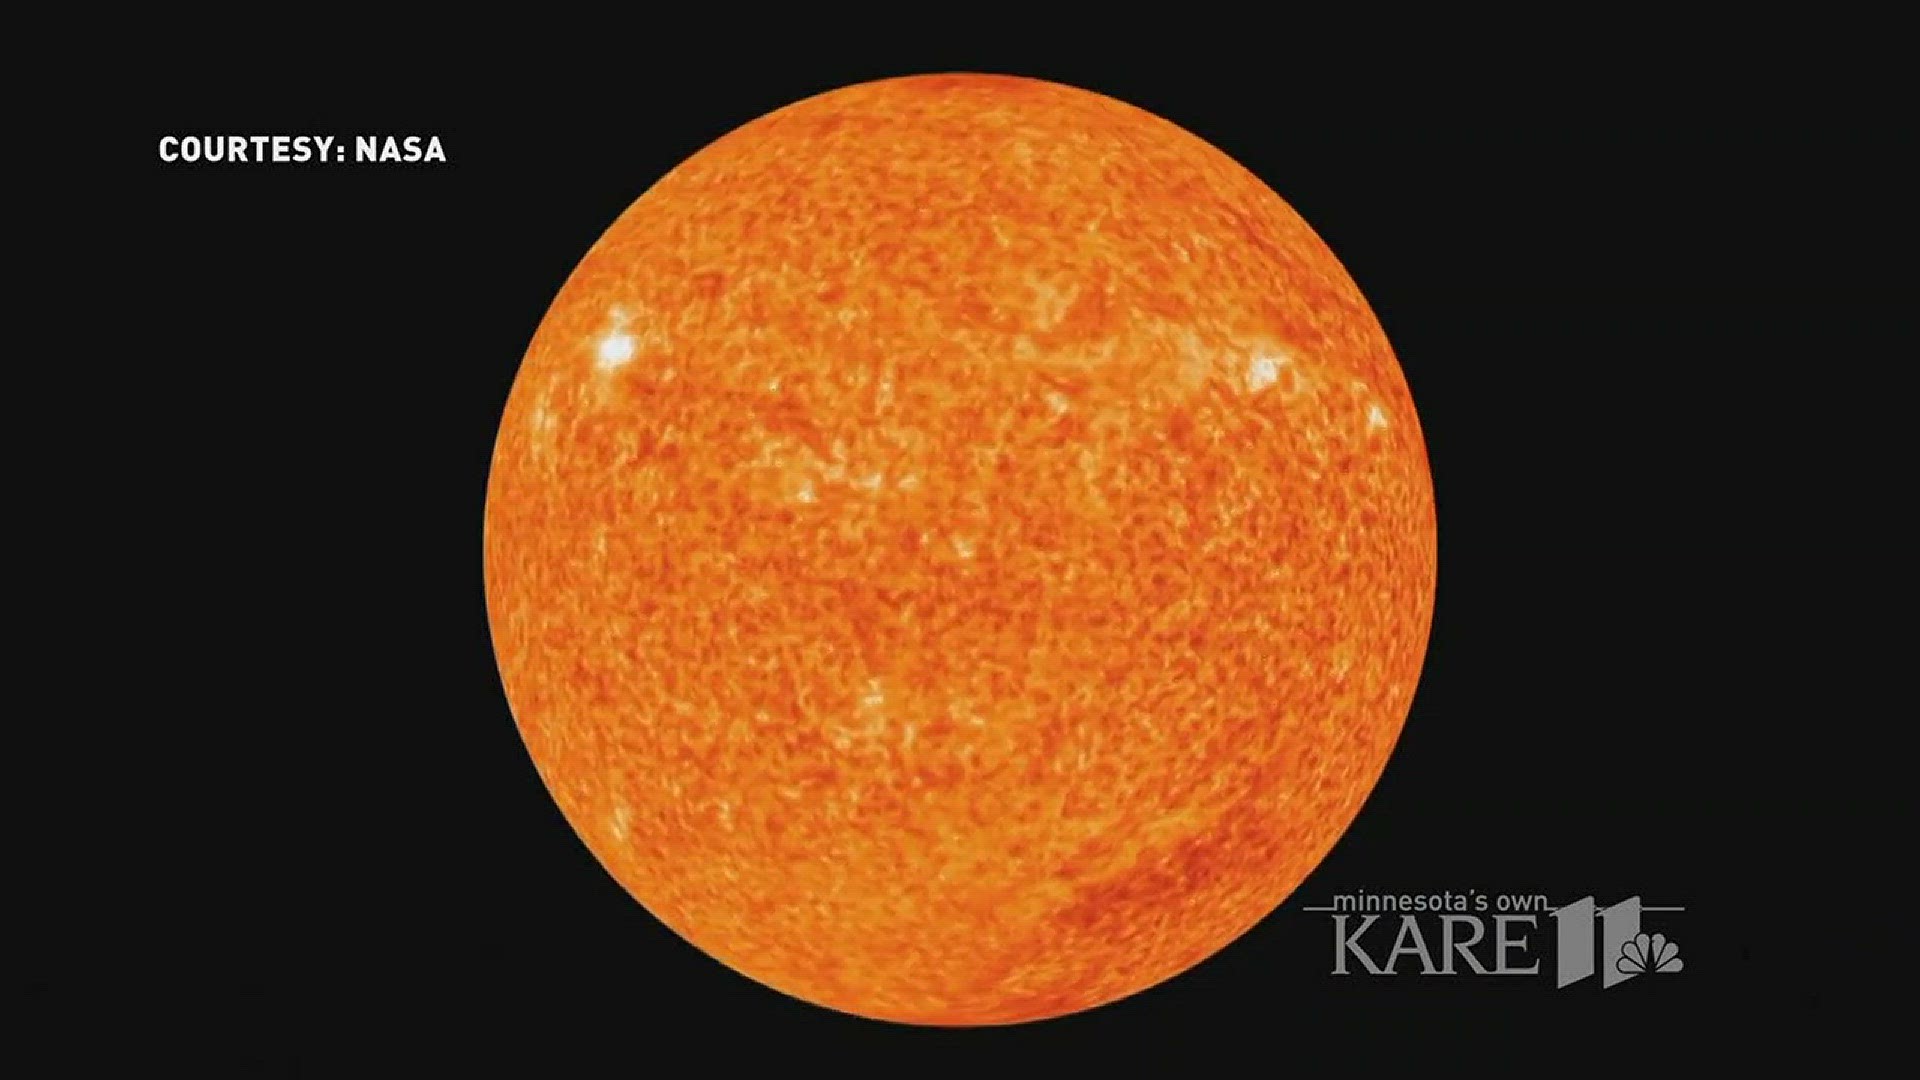 Right now, the largest sunspot of 2017 is traveling across the sun's surface. It's part of a group so large, that 11 Earths could fit inside. http://kare11.tv/2vaiWQH